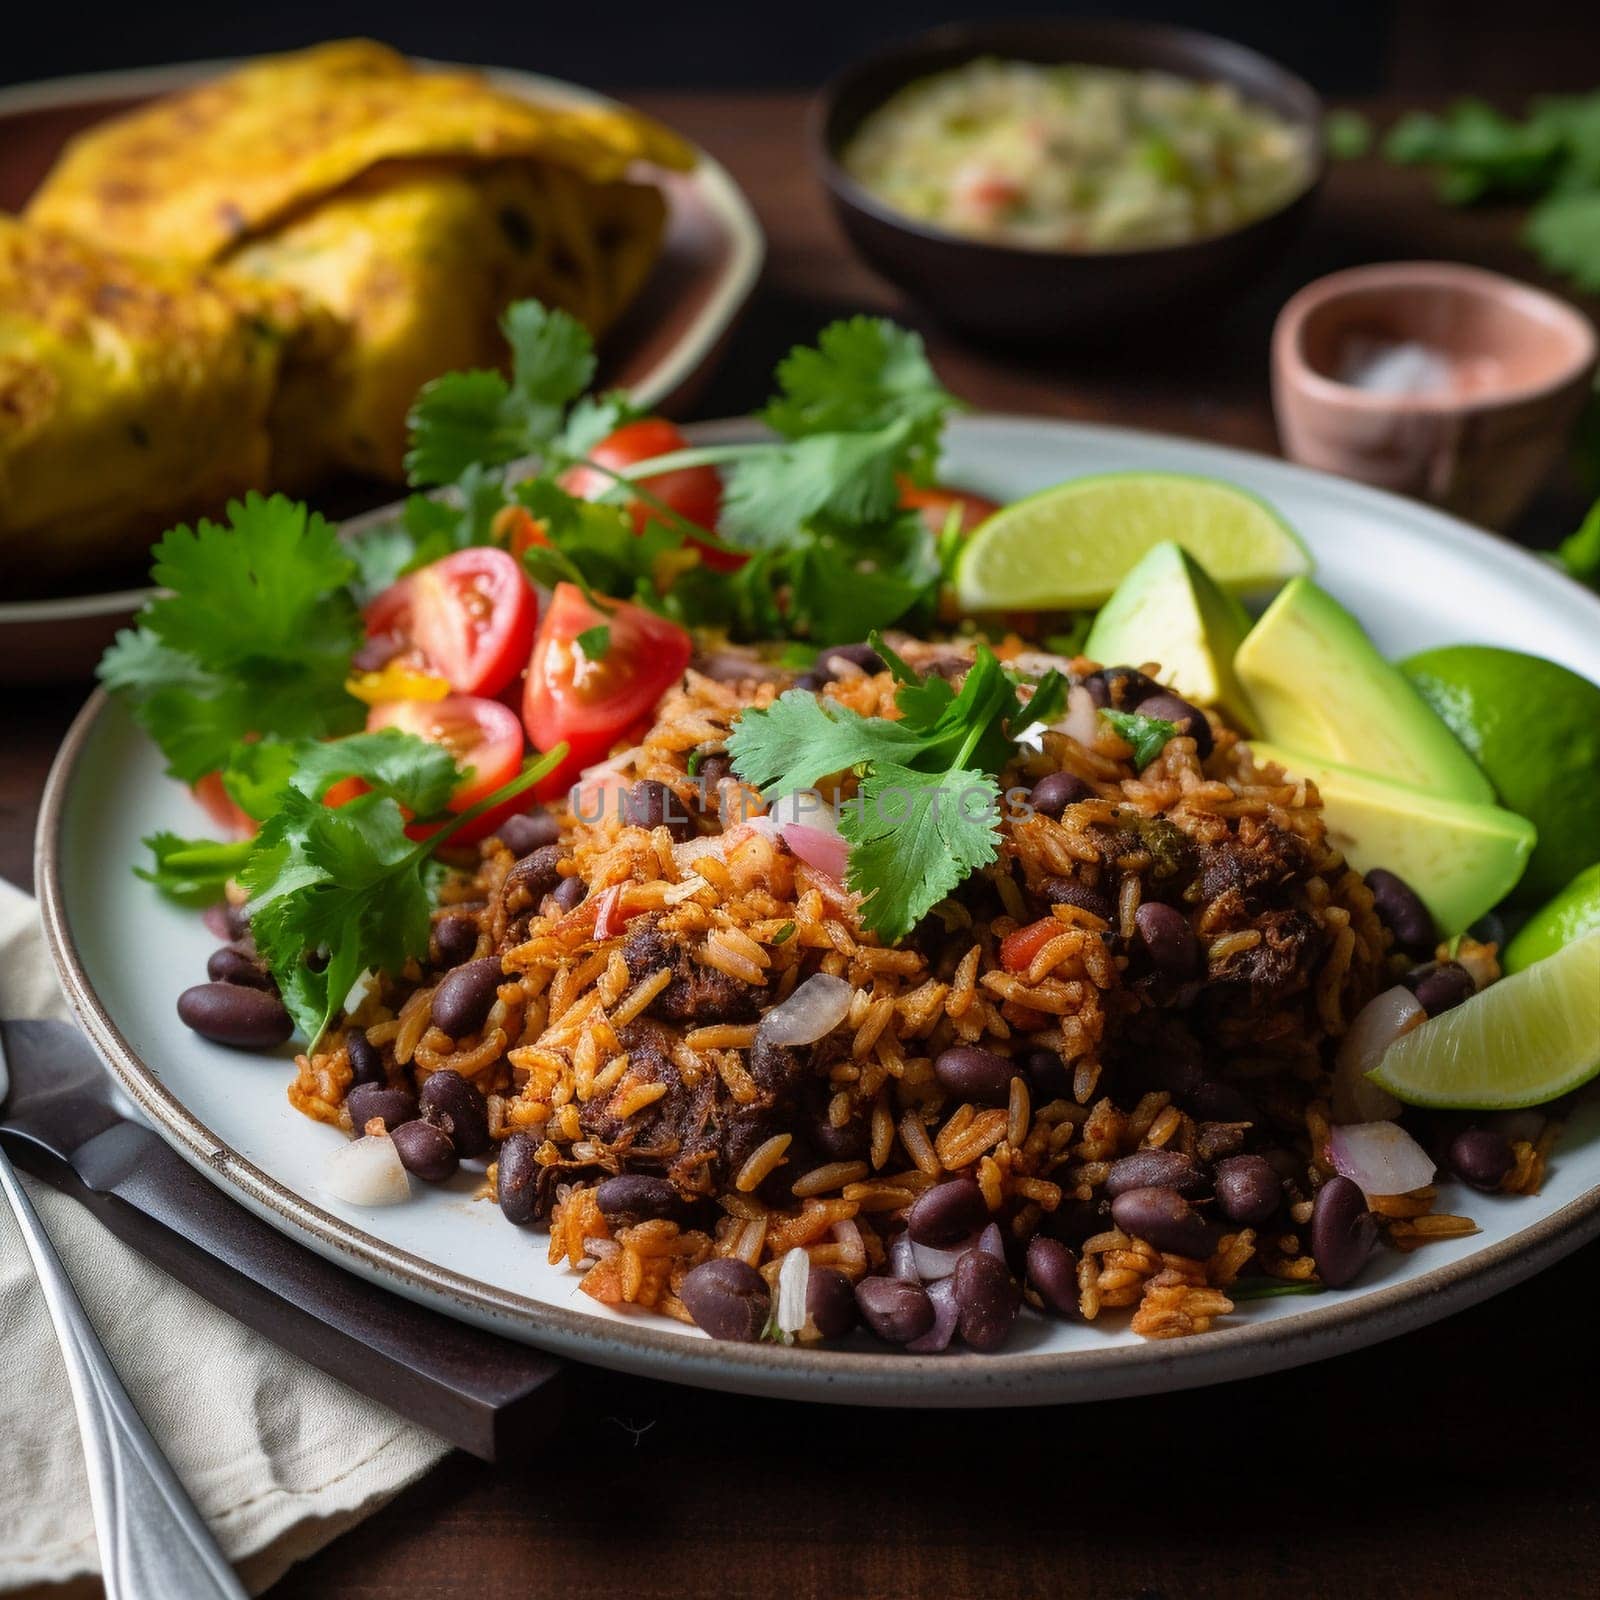 Colorful Costa Rican Gallo Pinto with Fried Plantains and Salad by Sahin